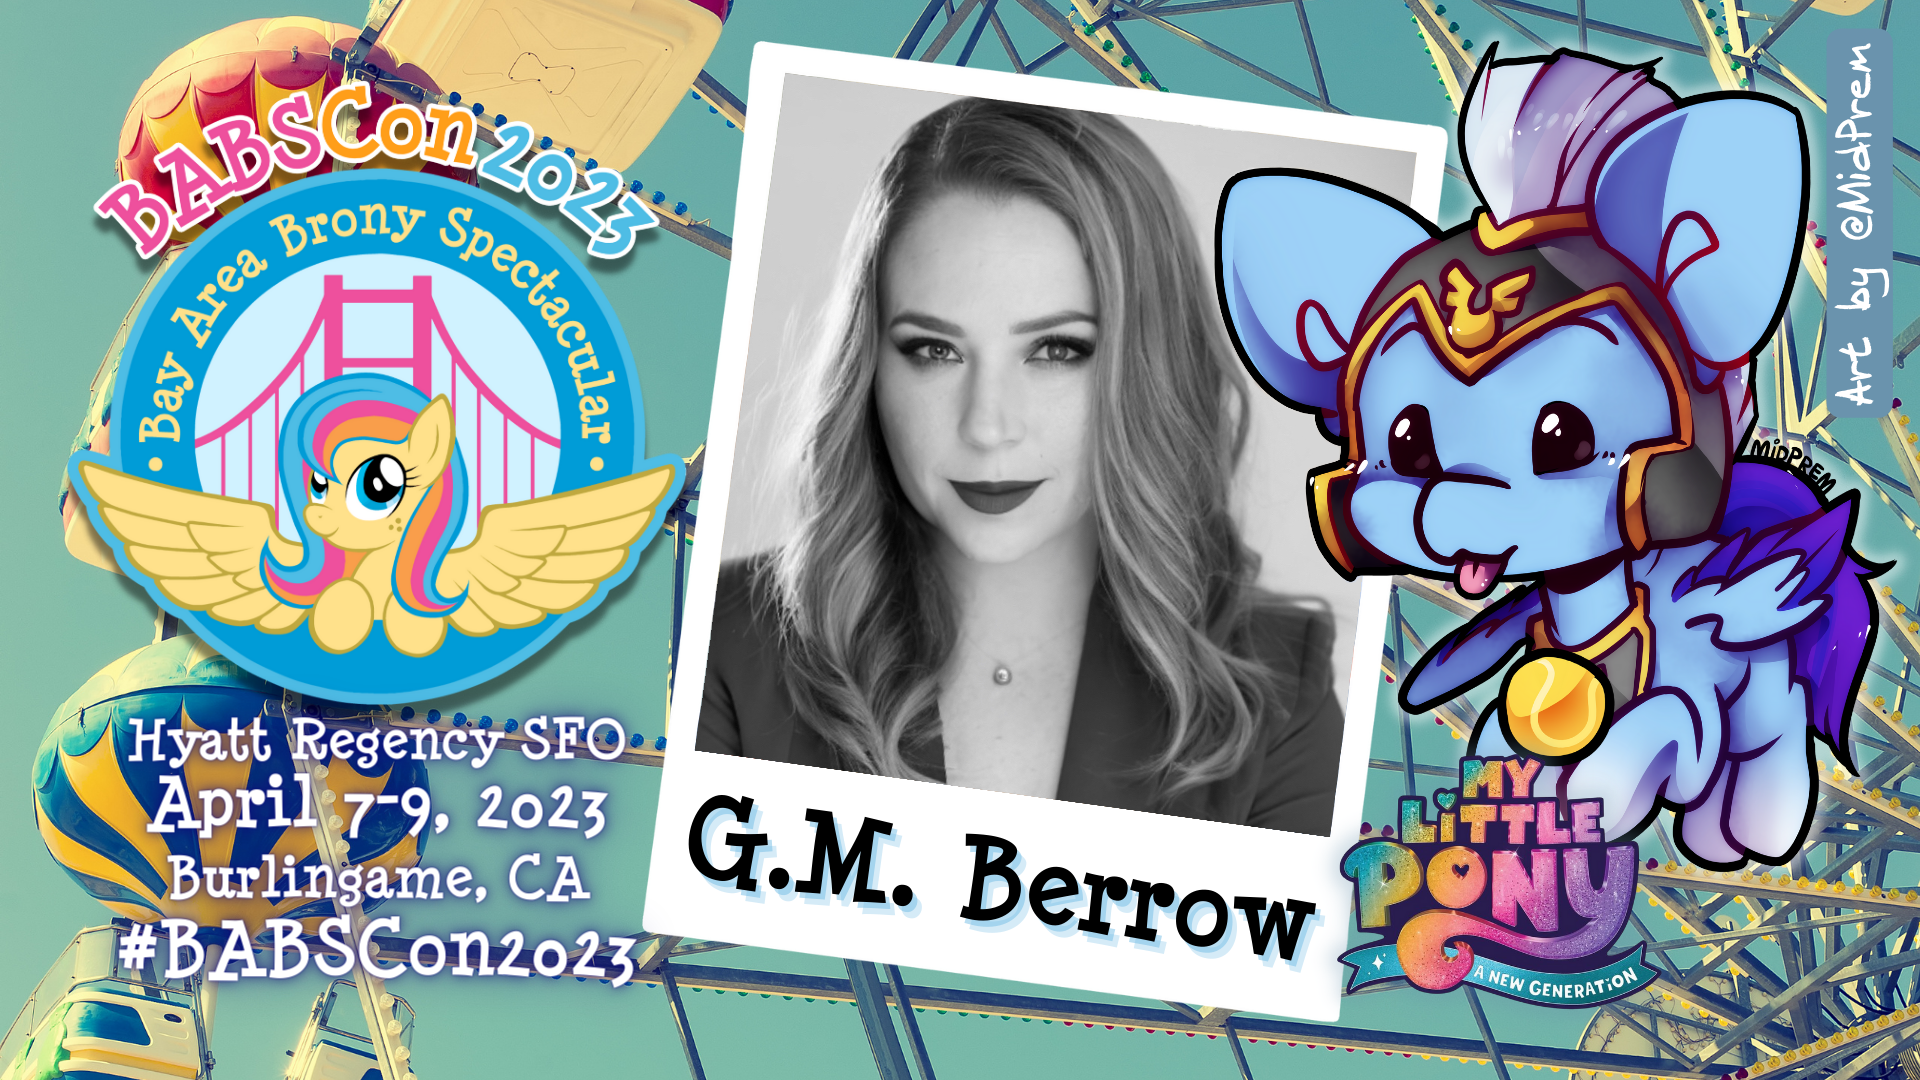 BABSCon 2023 Joins A New Generation with Gillian “GM” Berrow